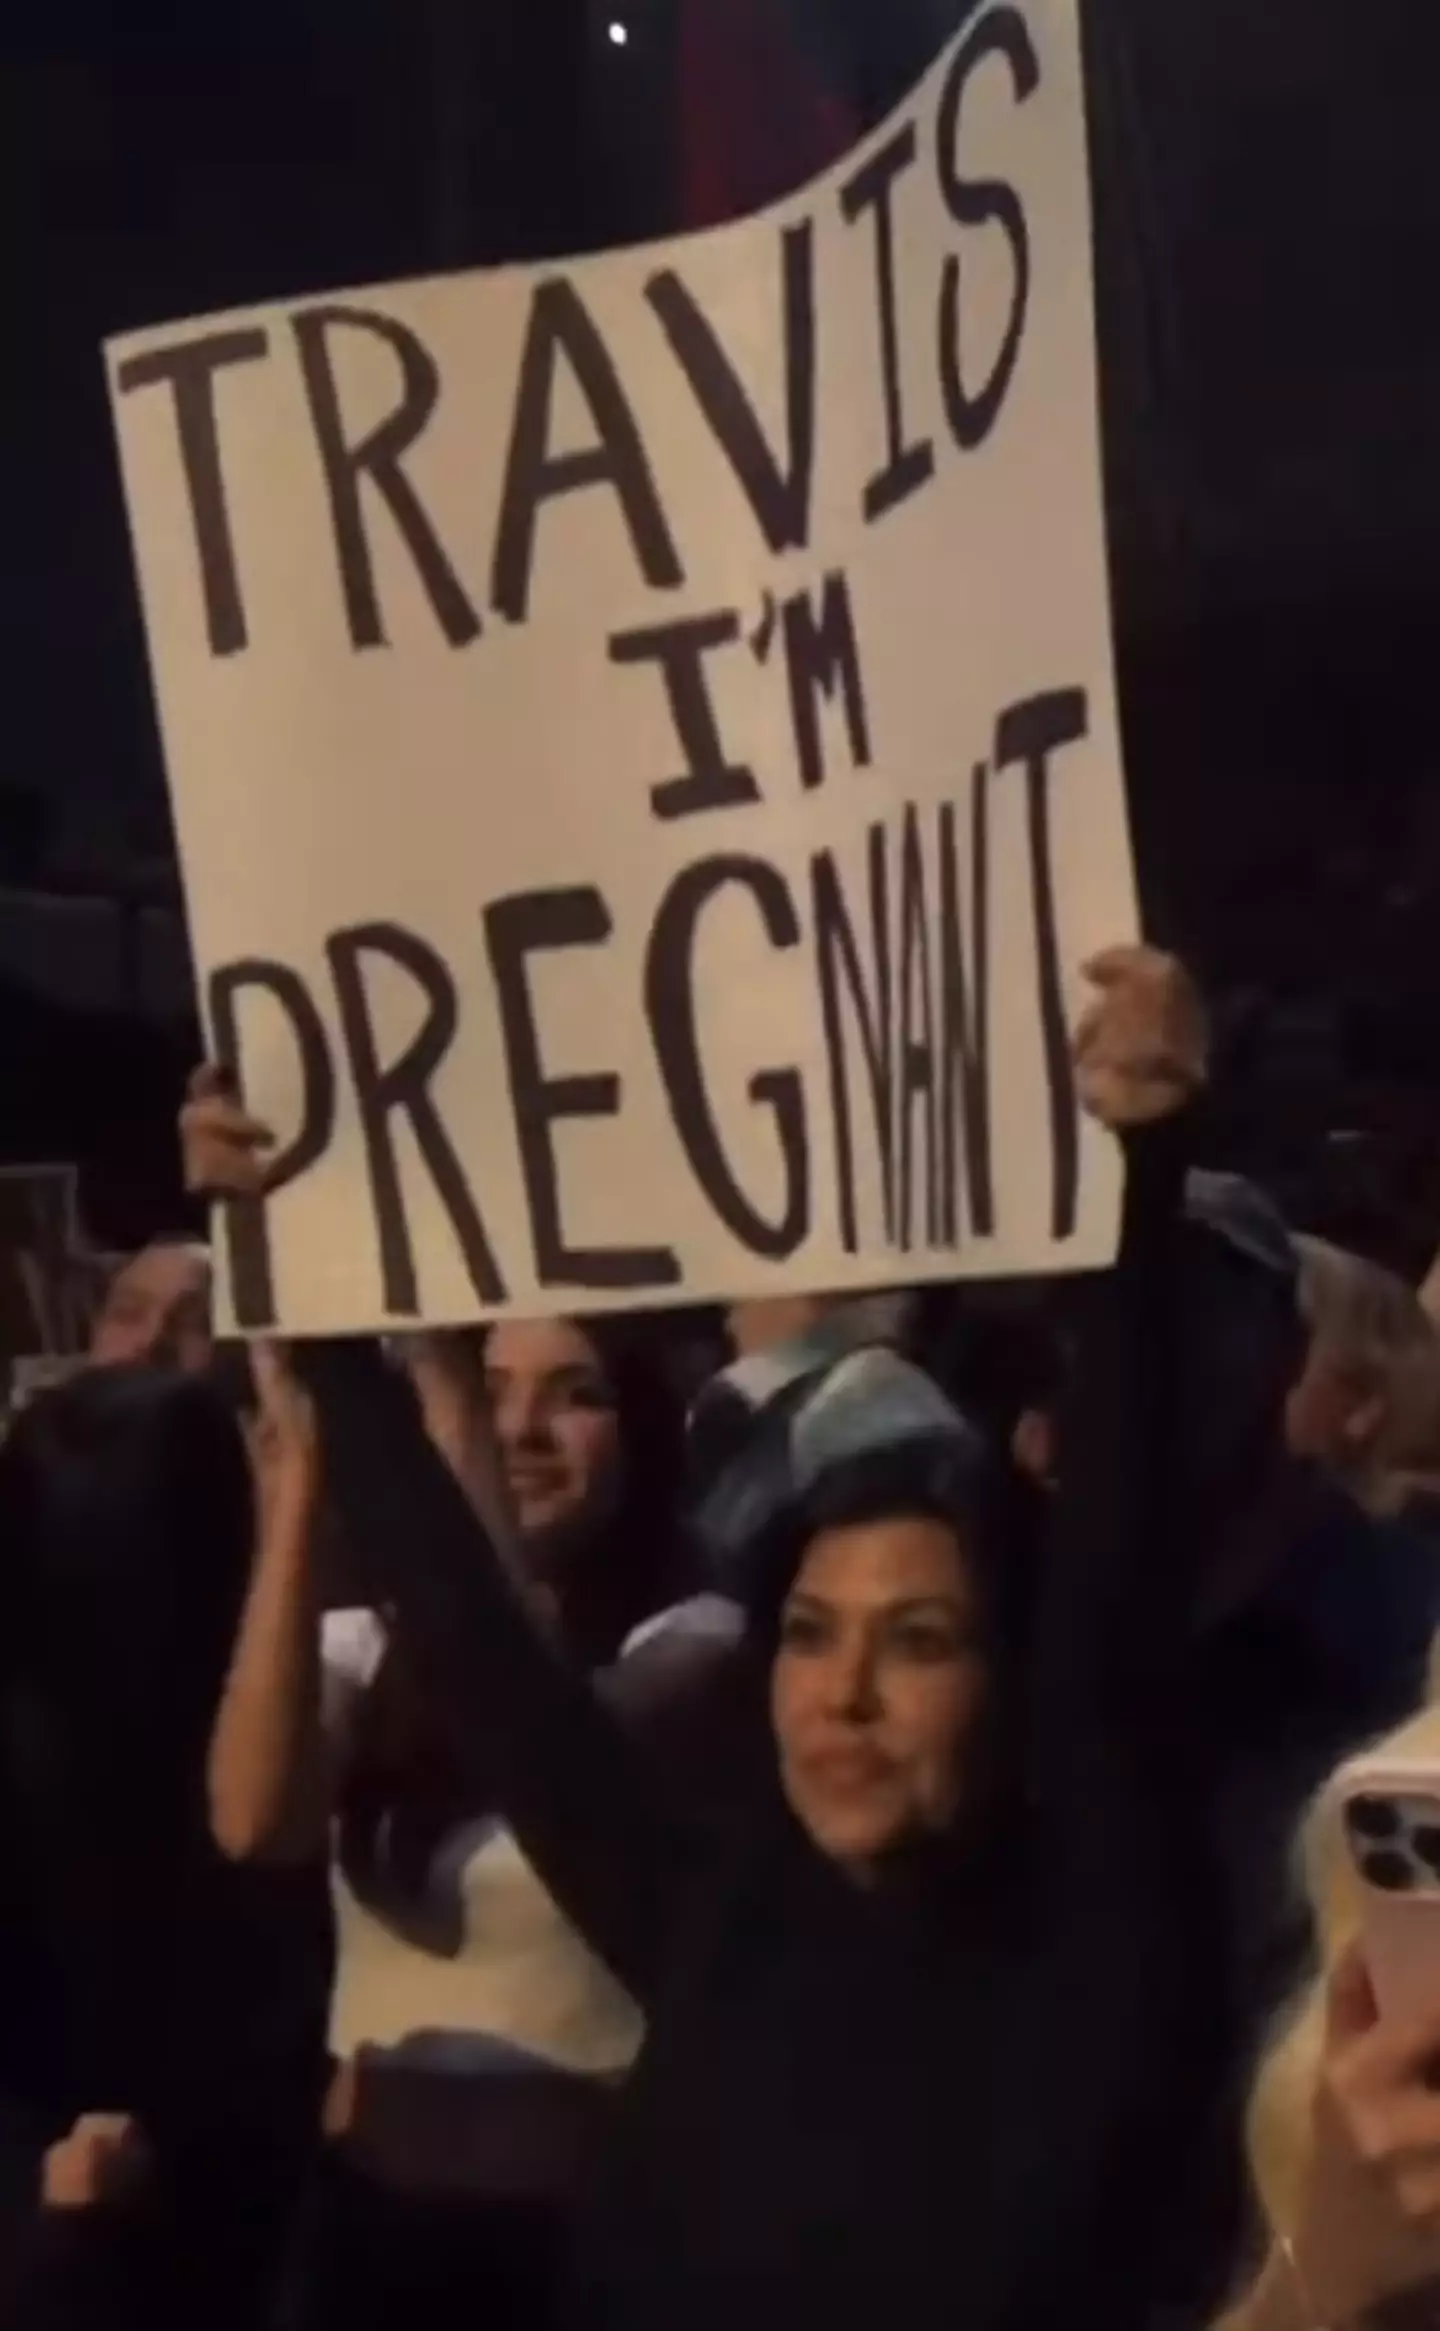 Kourtney kardashian held up a 'Travis I'm pregnant' sign from the crowd.